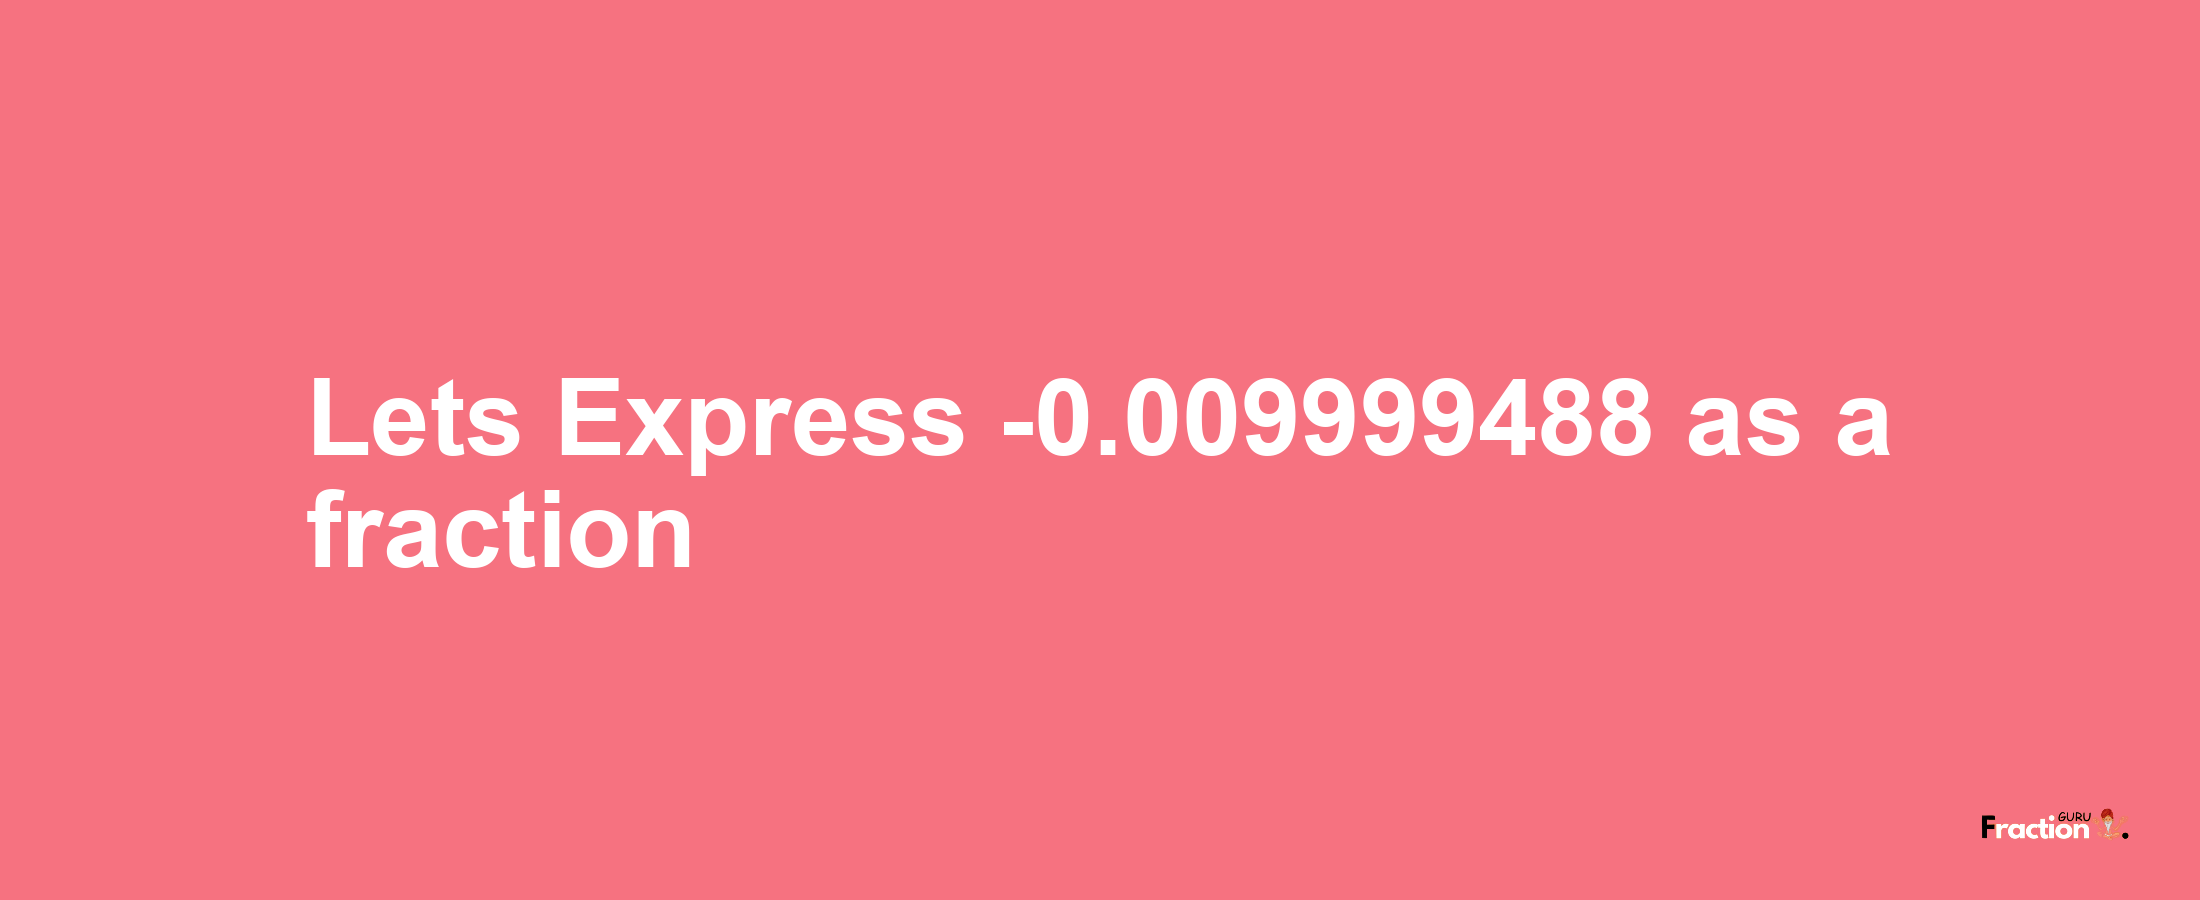 Lets Express -0.009999488 as afraction